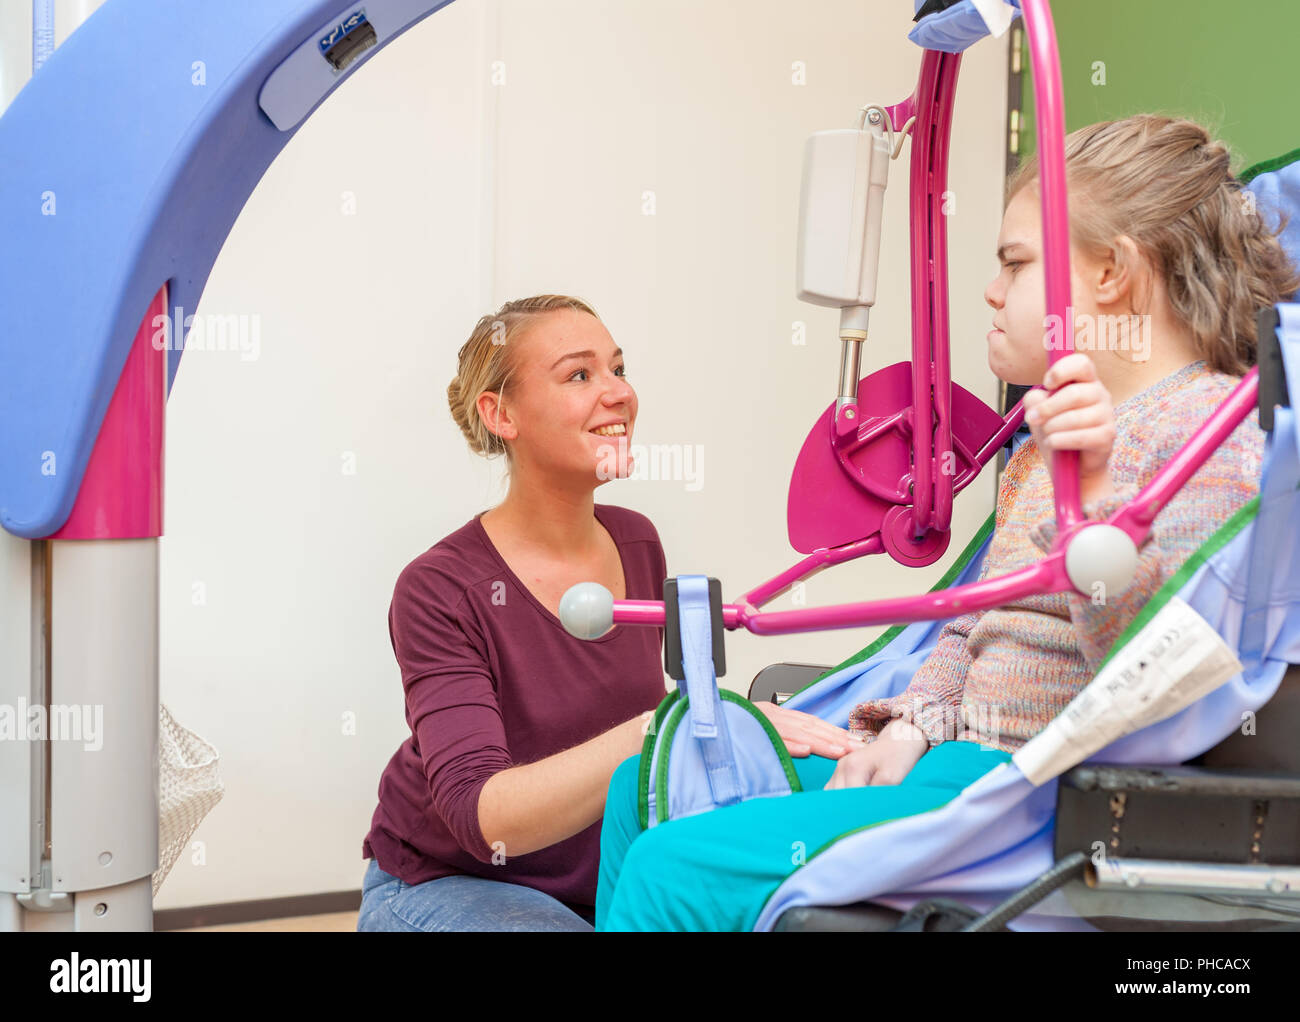 A disabled child being cared for by a special needs carer Stock Photo